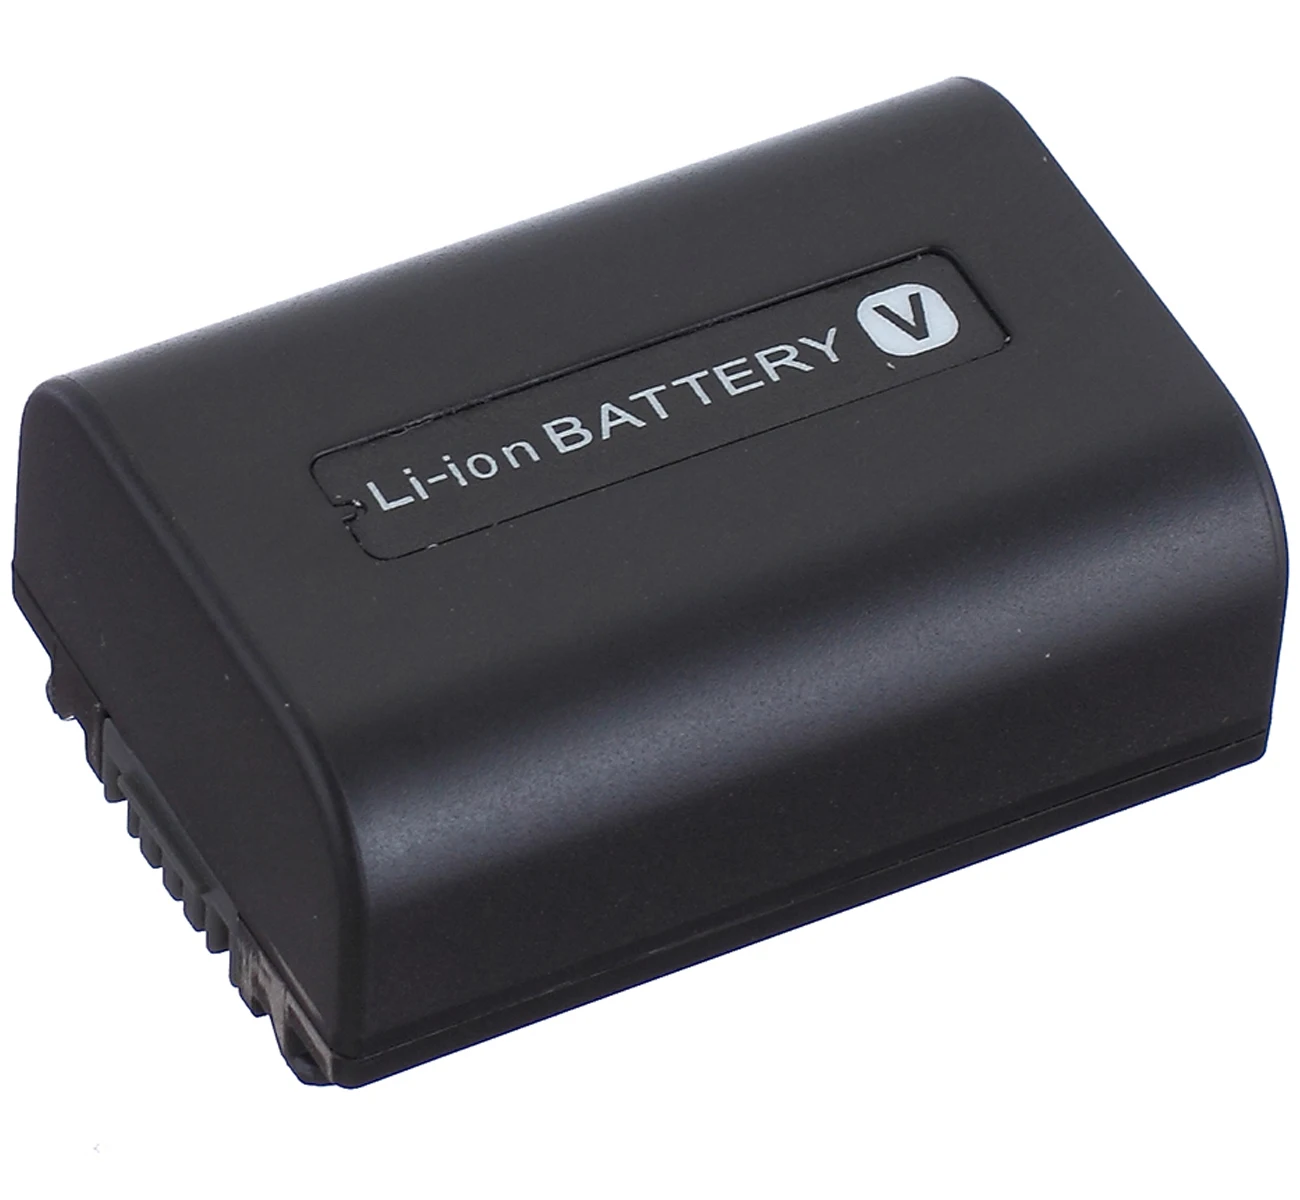 Battery Pack for Sony HDR-CX300E, HDR-CX400E, HDR-CX700VE, HDR-CX720VE, HDR-CX730E,  HDR-CX740E, HDR-CX760VE Handycam Camcorder